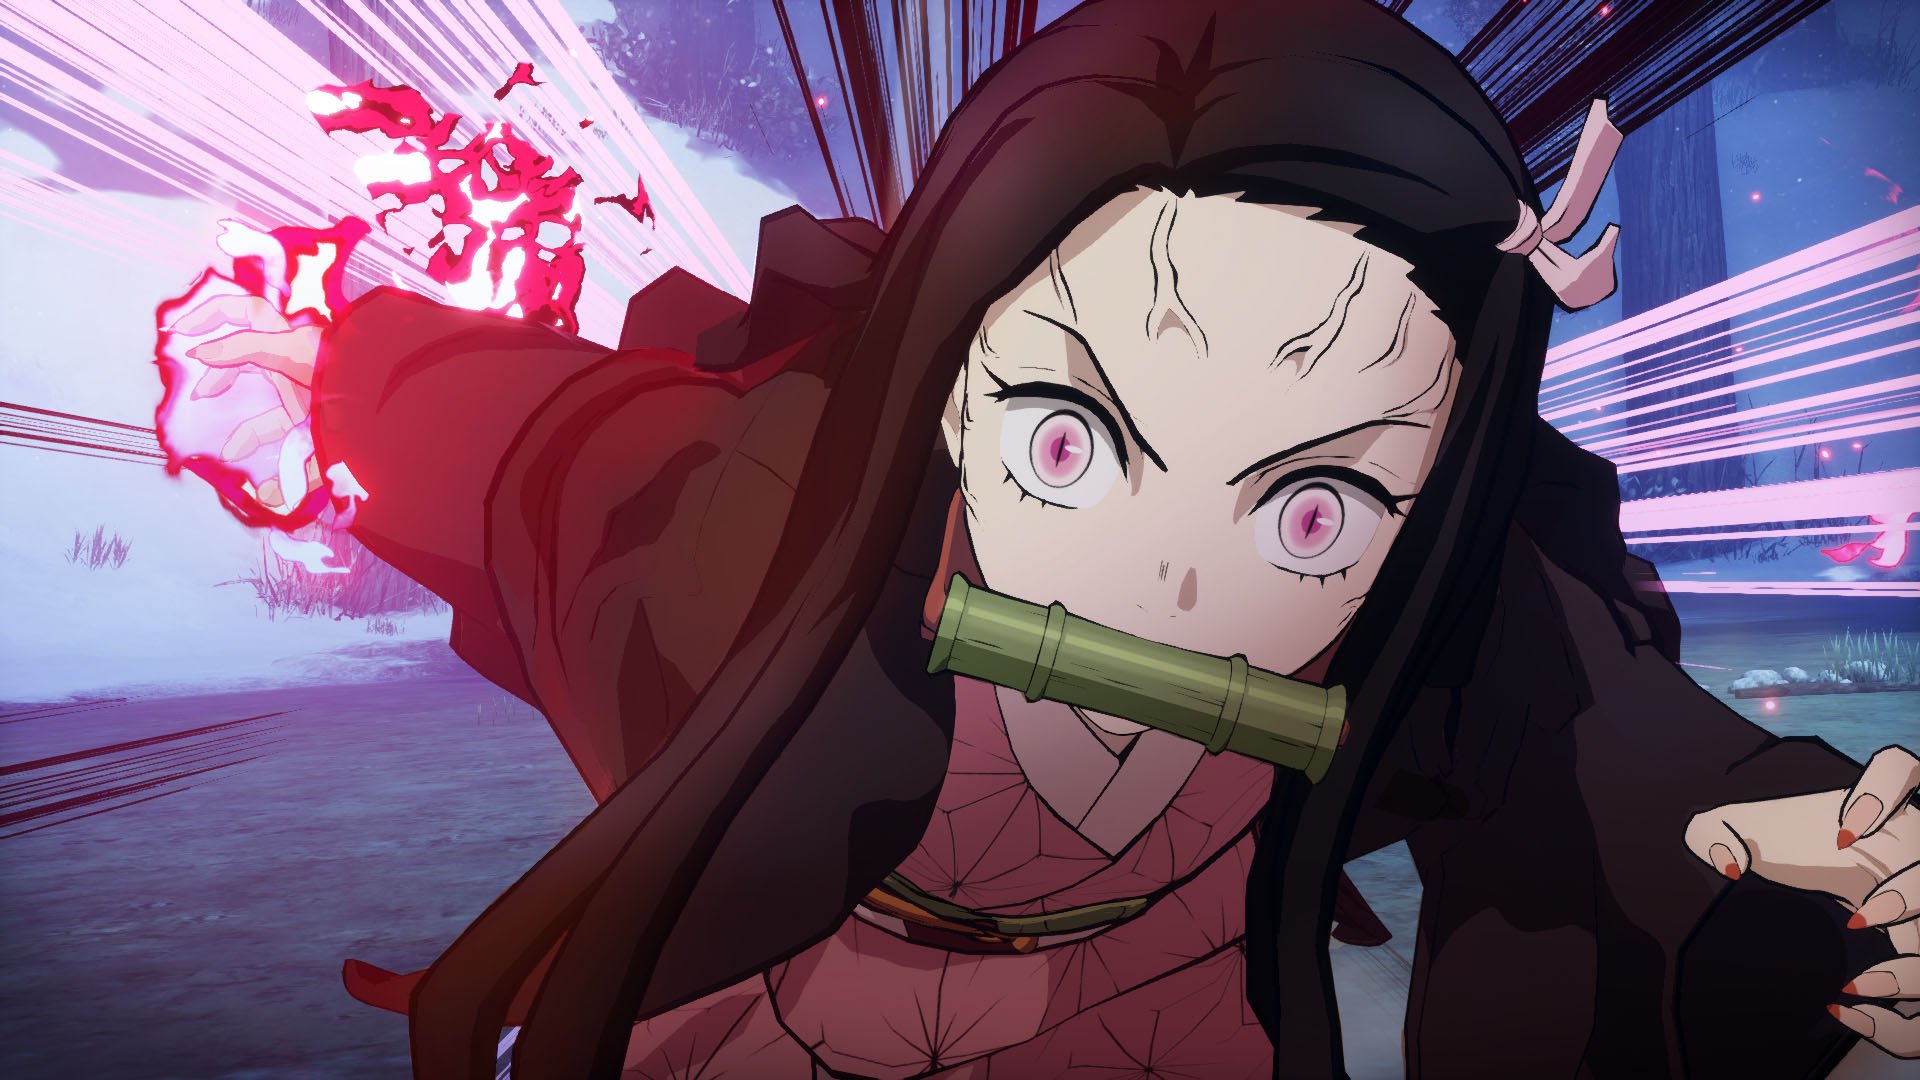 Demon Slayer Game Confirmed For PS5, Xbox Series X, and PC - Demon Slayer Game Release Date Nintendo Switch